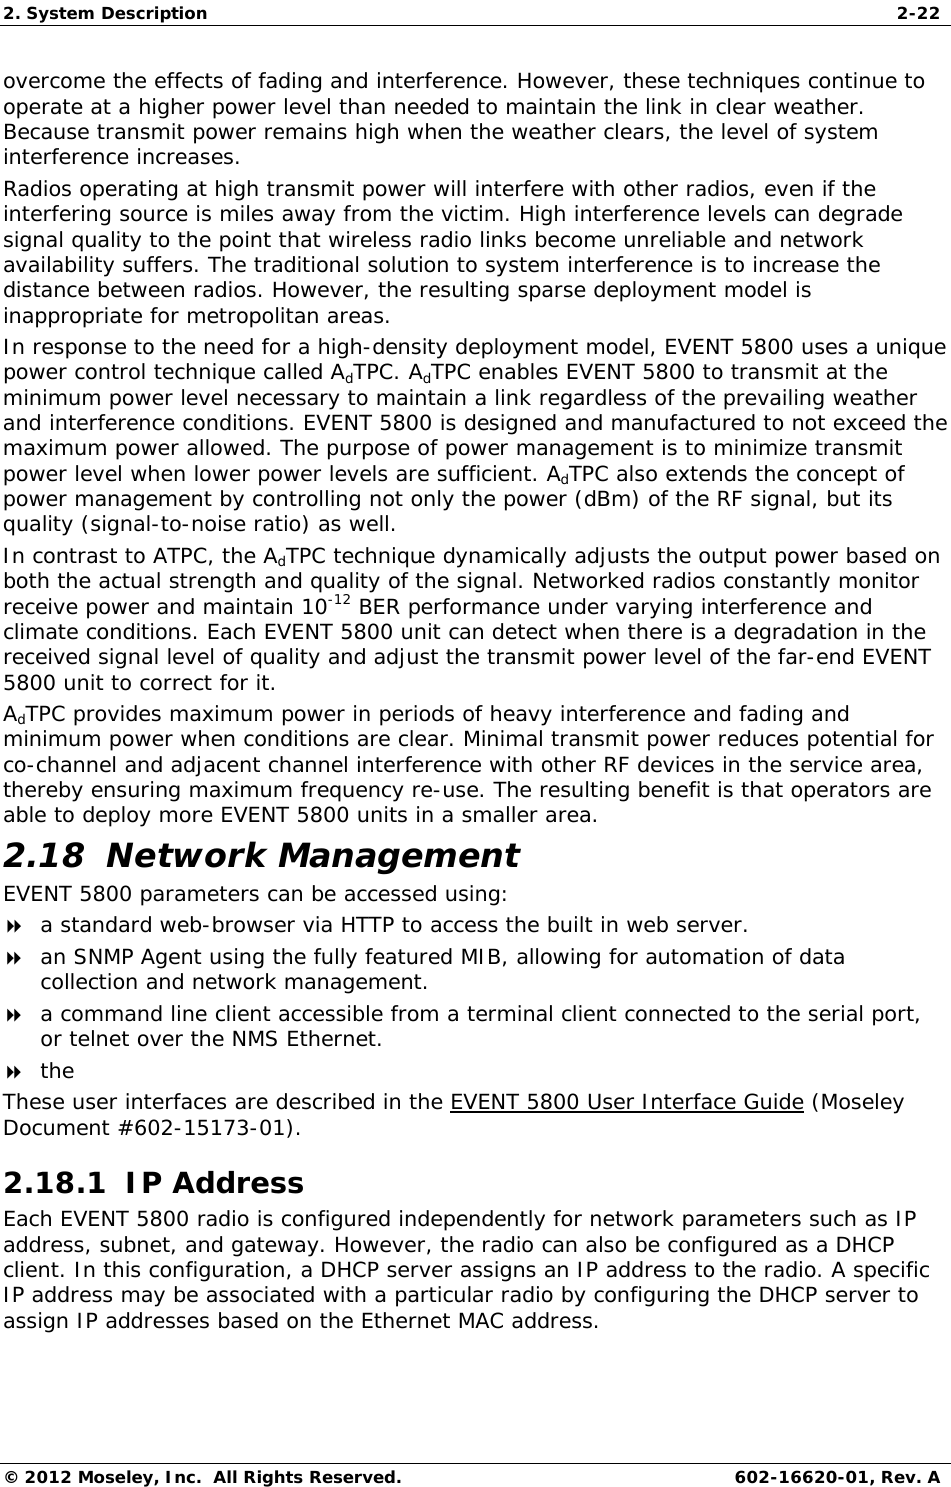 2. System Description  2-22 © 2012 Moseley, Inc.  All Rights Reserved.  602-16620-01, Rev. A overcome the effects of fading and interference. However, these techniques continue to operate at a higher power level than needed to maintain the link in clear weather. Because transmit power remains high when the weather clears, the level of system interference increases. Radios operating at high transmit power will interfere with other radios, even if the interfering source is miles away from the victim. High interference levels can degrade signal quality to the point that wireless radio links become unreliable and network availability suffers. The traditional solution to system interference is to increase the distance between radios. However, the resulting sparse deployment model is inappropriate for metropolitan areas. In response to the need for a high-density deployment model, EVENT 5800 uses a unique power control technique called AdTPC. AdTPC enables EVENT 5800 to transmit at the minimum power level necessary to maintain a link regardless of the prevailing weather and interference conditions. EVENT 5800 is designed and manufactured to not exceed the maximum power allowed. The purpose of power management is to minimize transmit power level when lower power levels are sufficient. AdTPC also extends the concept of power management by controlling not only the power (dBm) of the RF signal, but its quality (signal-to-noise ratio) as well. In contrast to ATPC, the AdTPC technique dynamically adjusts the output power based on both the actual strength and quality of the signal. Networked radios constantly monitor receive power and maintain 10-12 BER performance under varying interference and climate conditions. Each EVENT 5800 unit can detect when there is a degradation in the received signal level of quality and adjust the transmit power level of the far-end EVENT 5800 unit to correct for it. AdTPC provides maximum power in periods of heavy interference and fading and minimum power when conditions are clear. Minimal transmit power reduces potential for co-channel and adjacent channel interference with other RF devices in the service area, thereby ensuring maximum frequency re-use. The resulting benefit is that operators are able to deploy more EVENT 5800 units in a smaller area. 2.18  Network Management EVENT 5800 parameters can be accessed using:  a standard web-browser via HTTP to access the built in web server.  an SNMP Agent using the fully featured MIB, allowing for automation of data collection and network management.  a command line client accessible from a terminal client connected to the serial port, or telnet over the NMS Ethernet.  the  These user interfaces are described in the EVENT 5800 User Interface Guide (Moseley Document #602-15173-01). 2.18.1  IP Address Each EVENT 5800 radio is configured independently for network parameters such as IP address, subnet, and gateway. However, the radio can also be configured as a DHCP client. In this configuration, a DHCP server assigns an IP address to the radio. A specific IP address may be associated with a particular radio by configuring the DHCP server to assign IP addresses based on the Ethernet MAC address. 